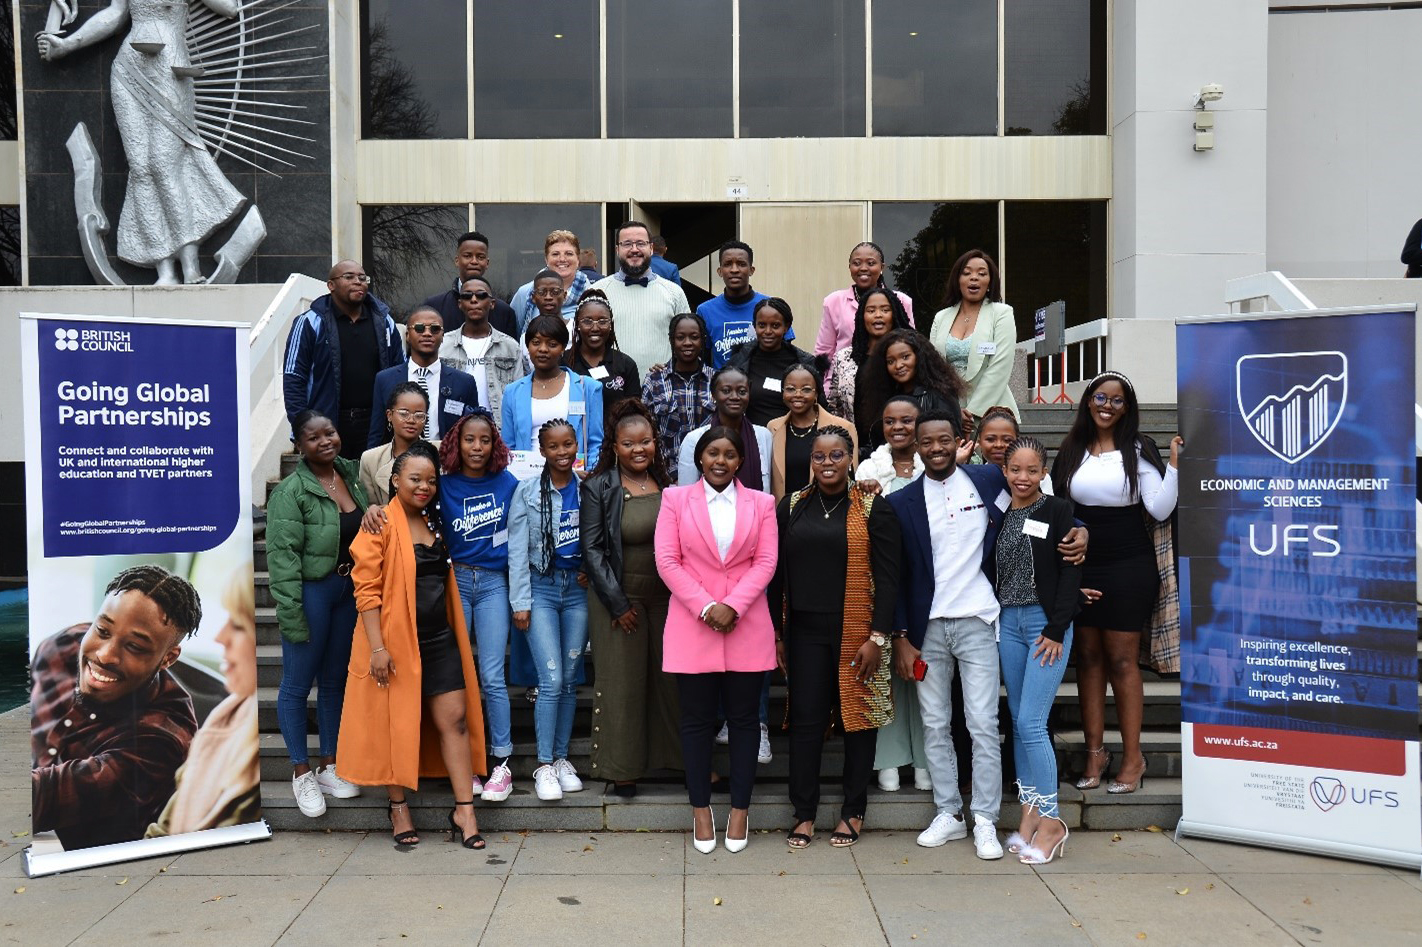 Students from the UFS Department of Economic and Management Science